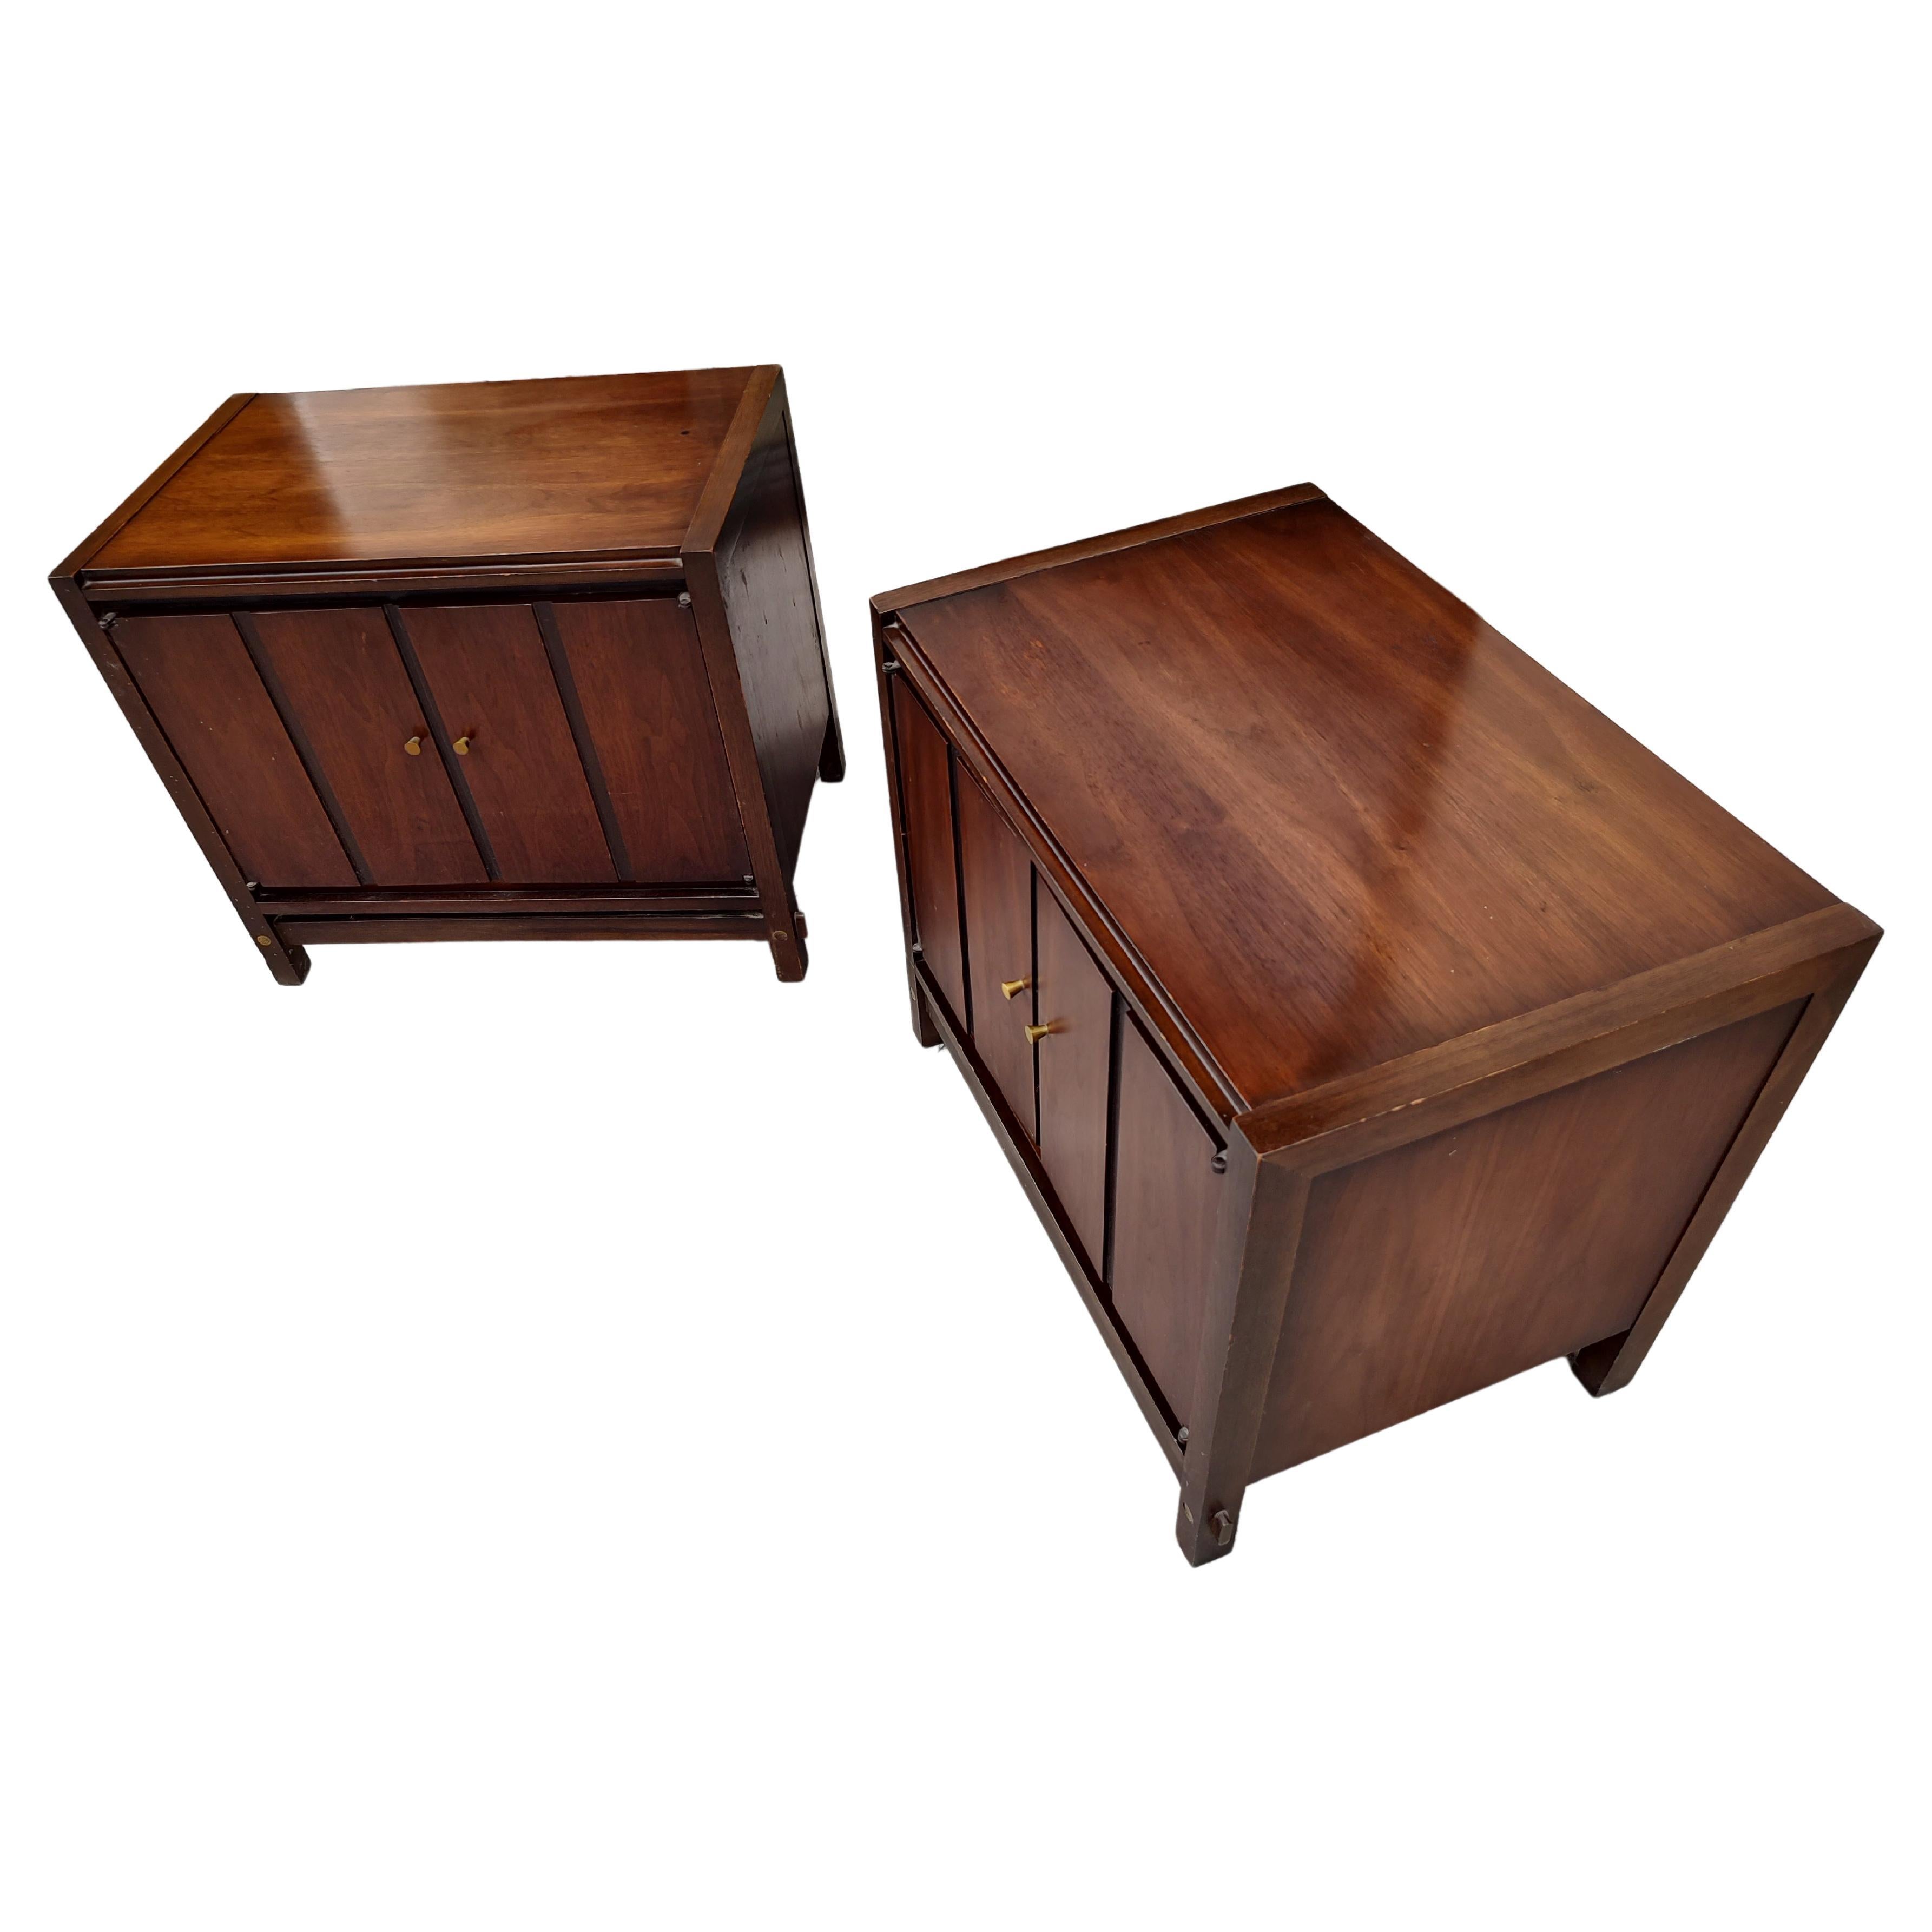 American Pair of Mid Century Modern Night Tables by Lane C 1965 For Sale